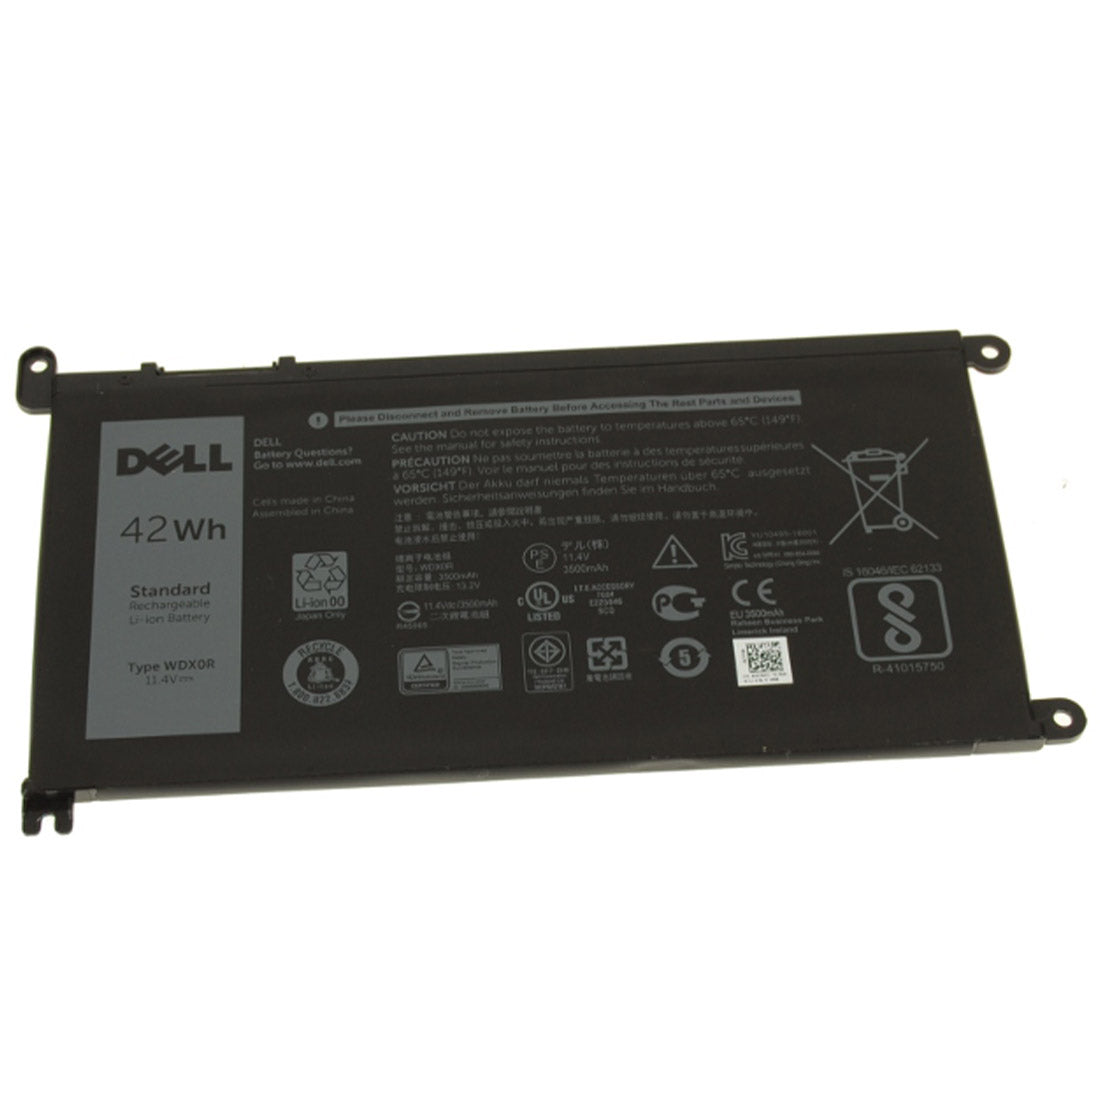 Dell Original 3500mAh 11.4V 42WHR 3-Cell Replacement Laptop Battery for Inspiron 15 5565